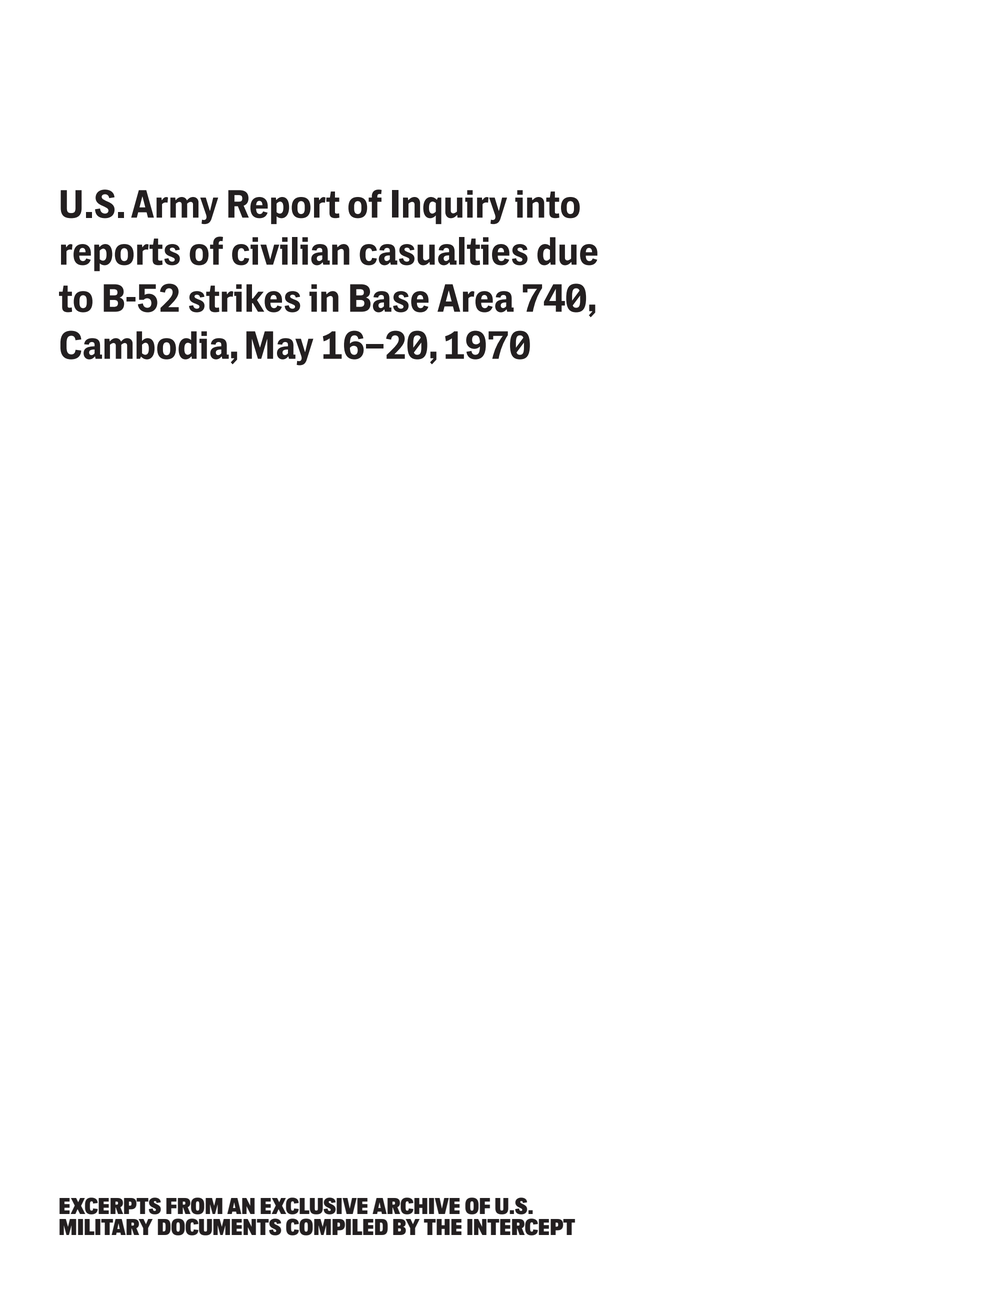 Page 6 from Excerpts-From-An-Exclusive-Archive-Of-US-Military-Documents-Compiled-by-The Intercept